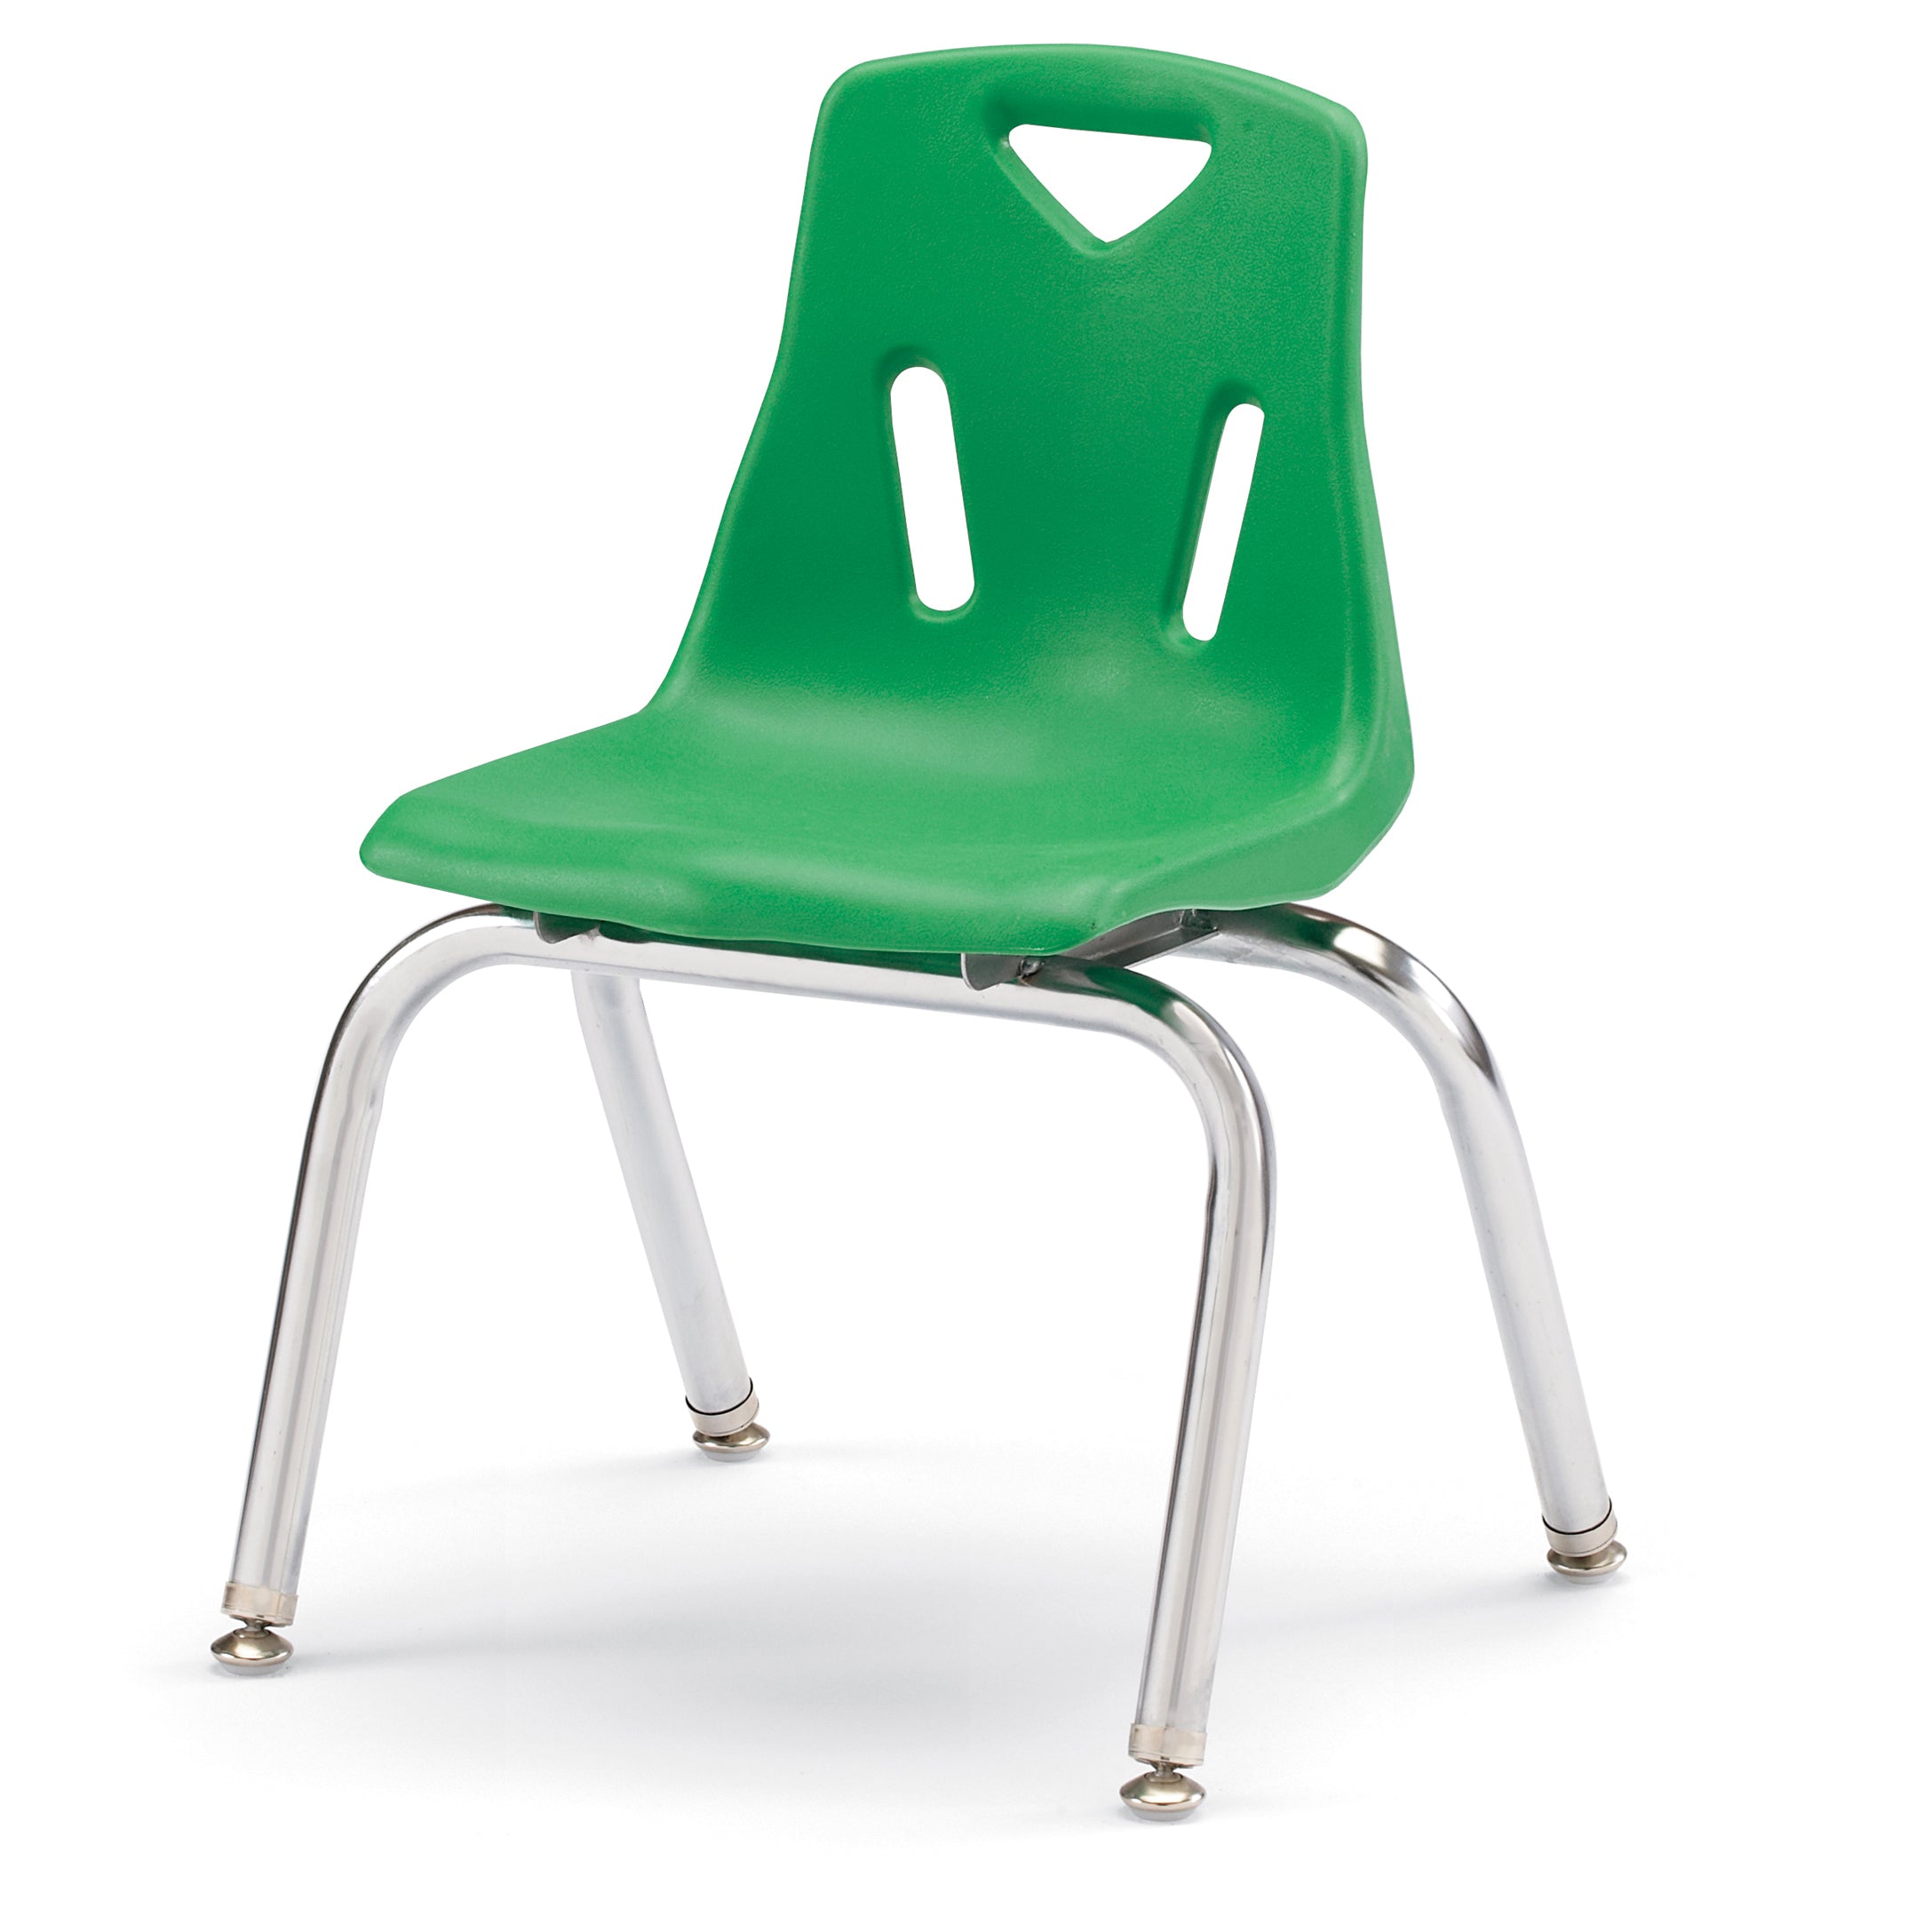 8144JC6119, Berries Stacking Chairs with Chrome-Plated Legs - 14" Ht - Set of 6 - Green